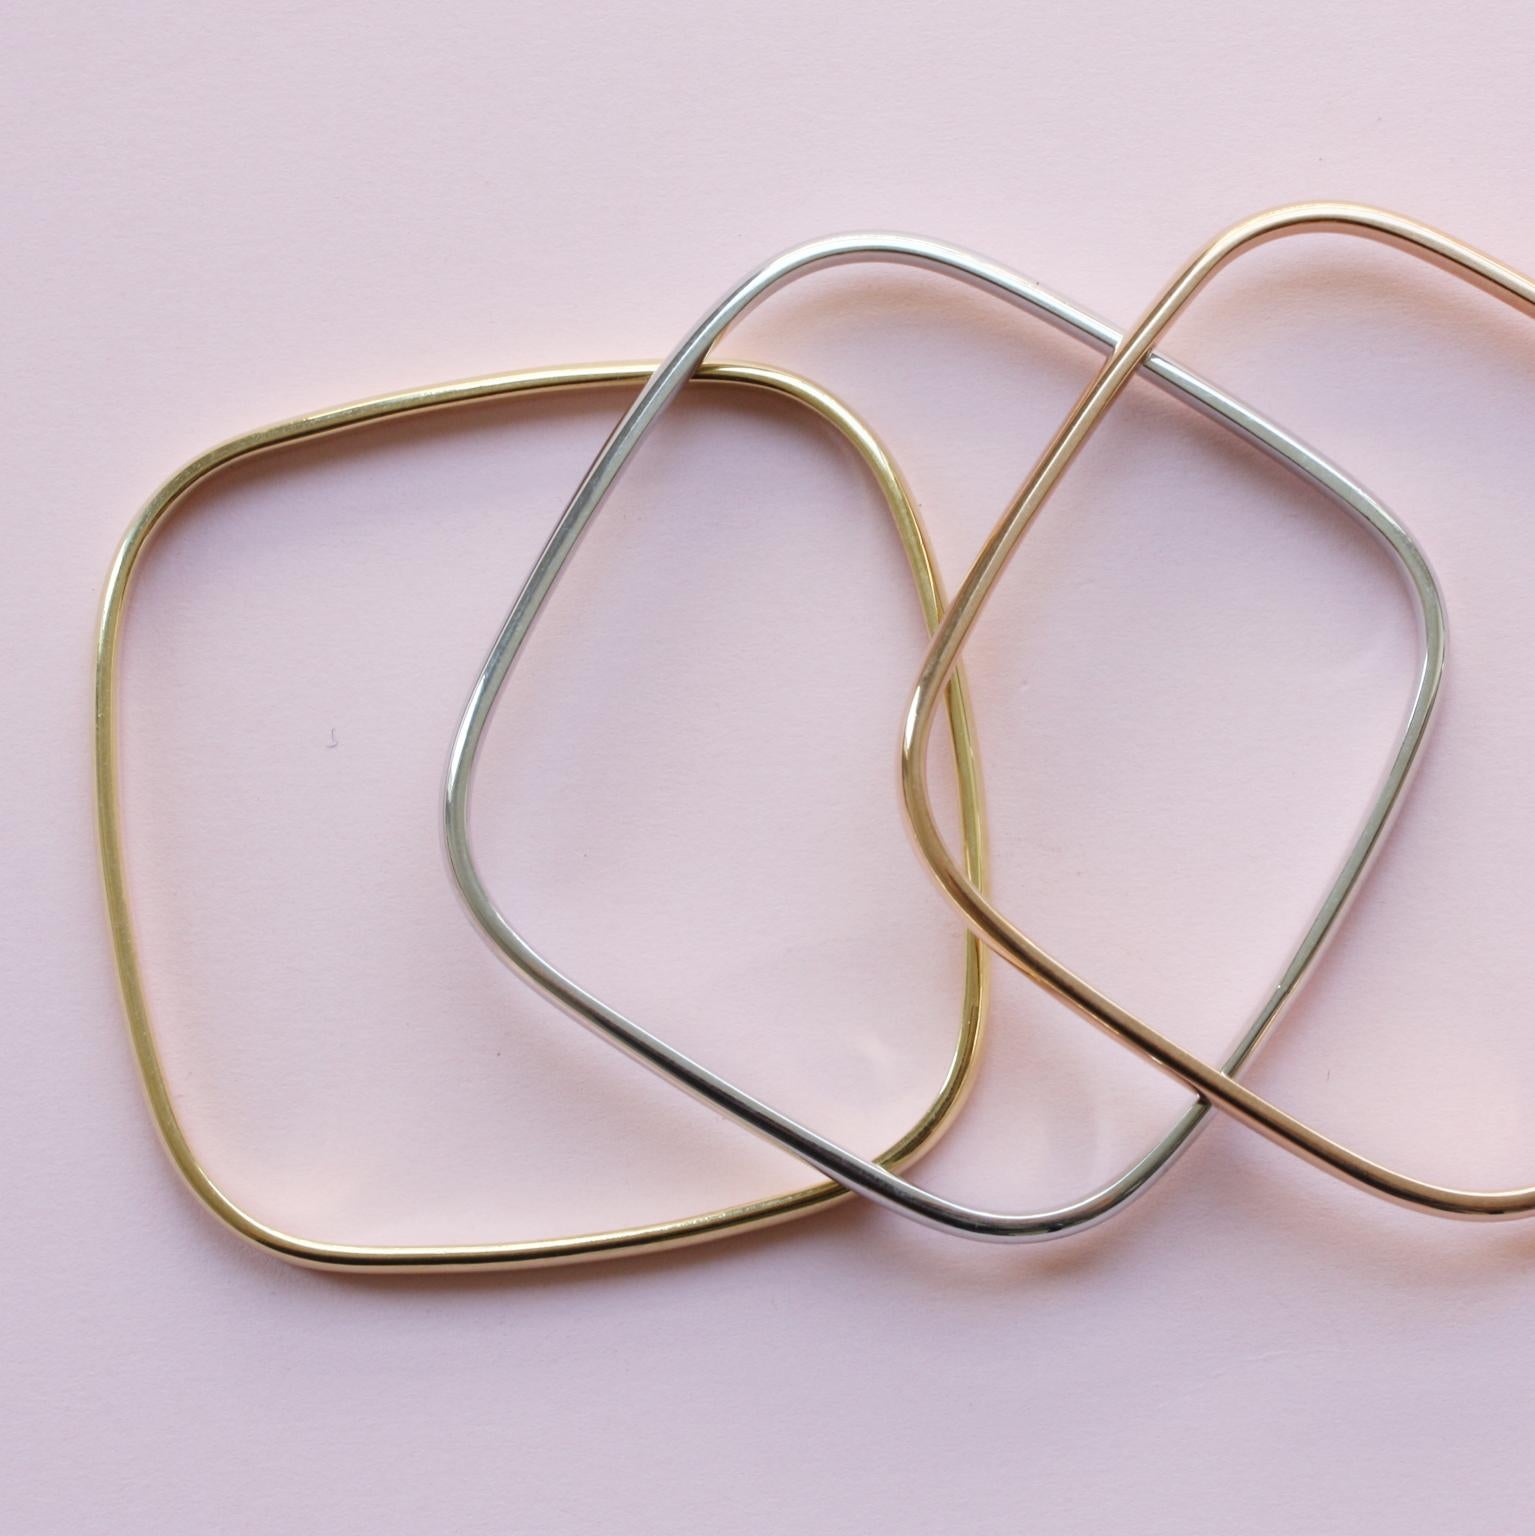 Three heavy 18 carat gold bangles, one yellow, one pink and one white gold, square with rounded corners, France, circa 1970.

weight: 83.03 grams
size: 6.2 x 6 cm.